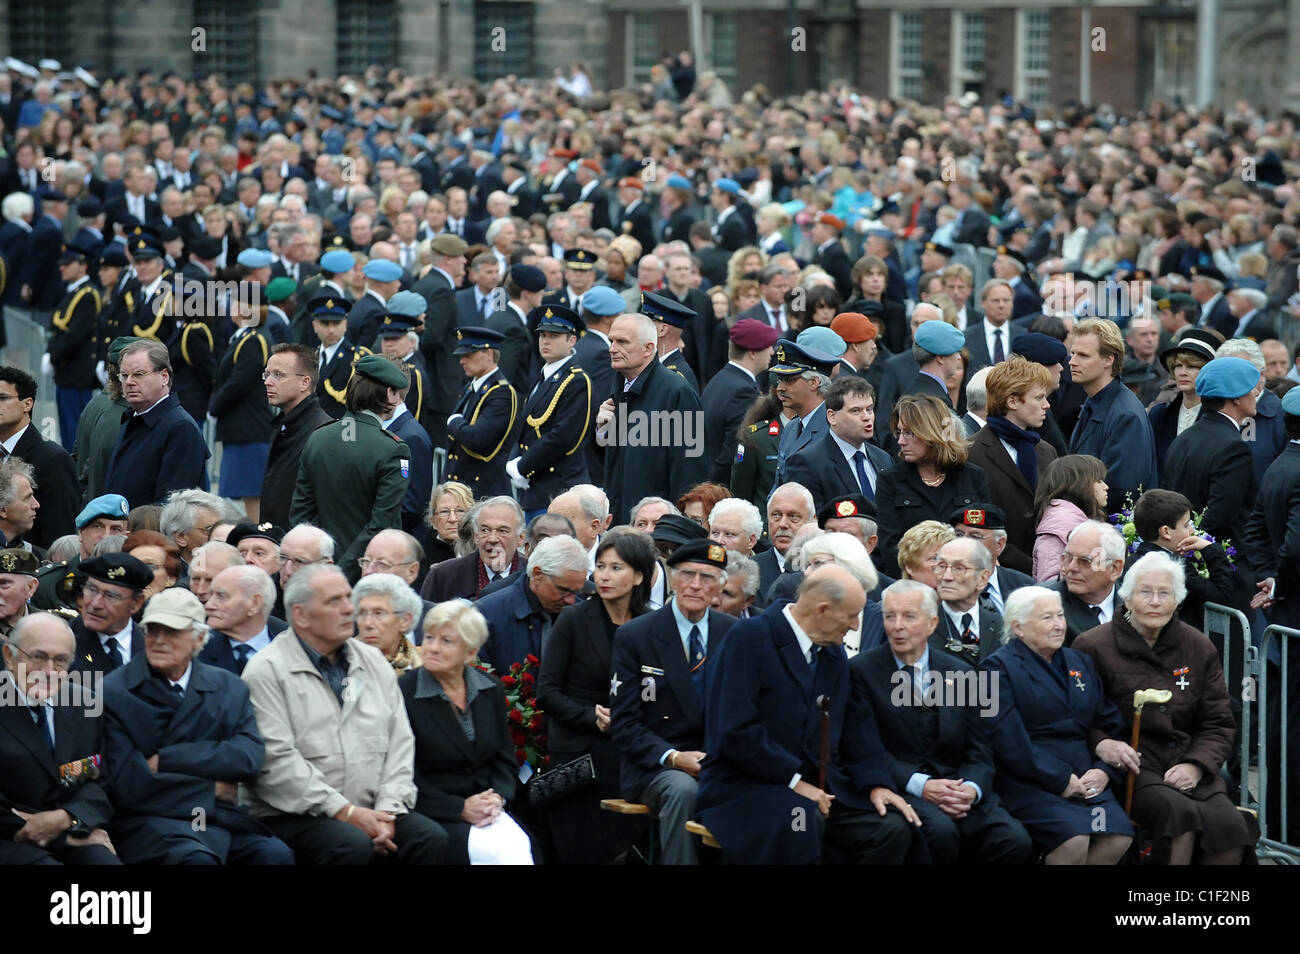 Veterens at the remembrance service for Dutch war casualties Amsterdam, The Netherlands - 04.05.09 Stock Photo